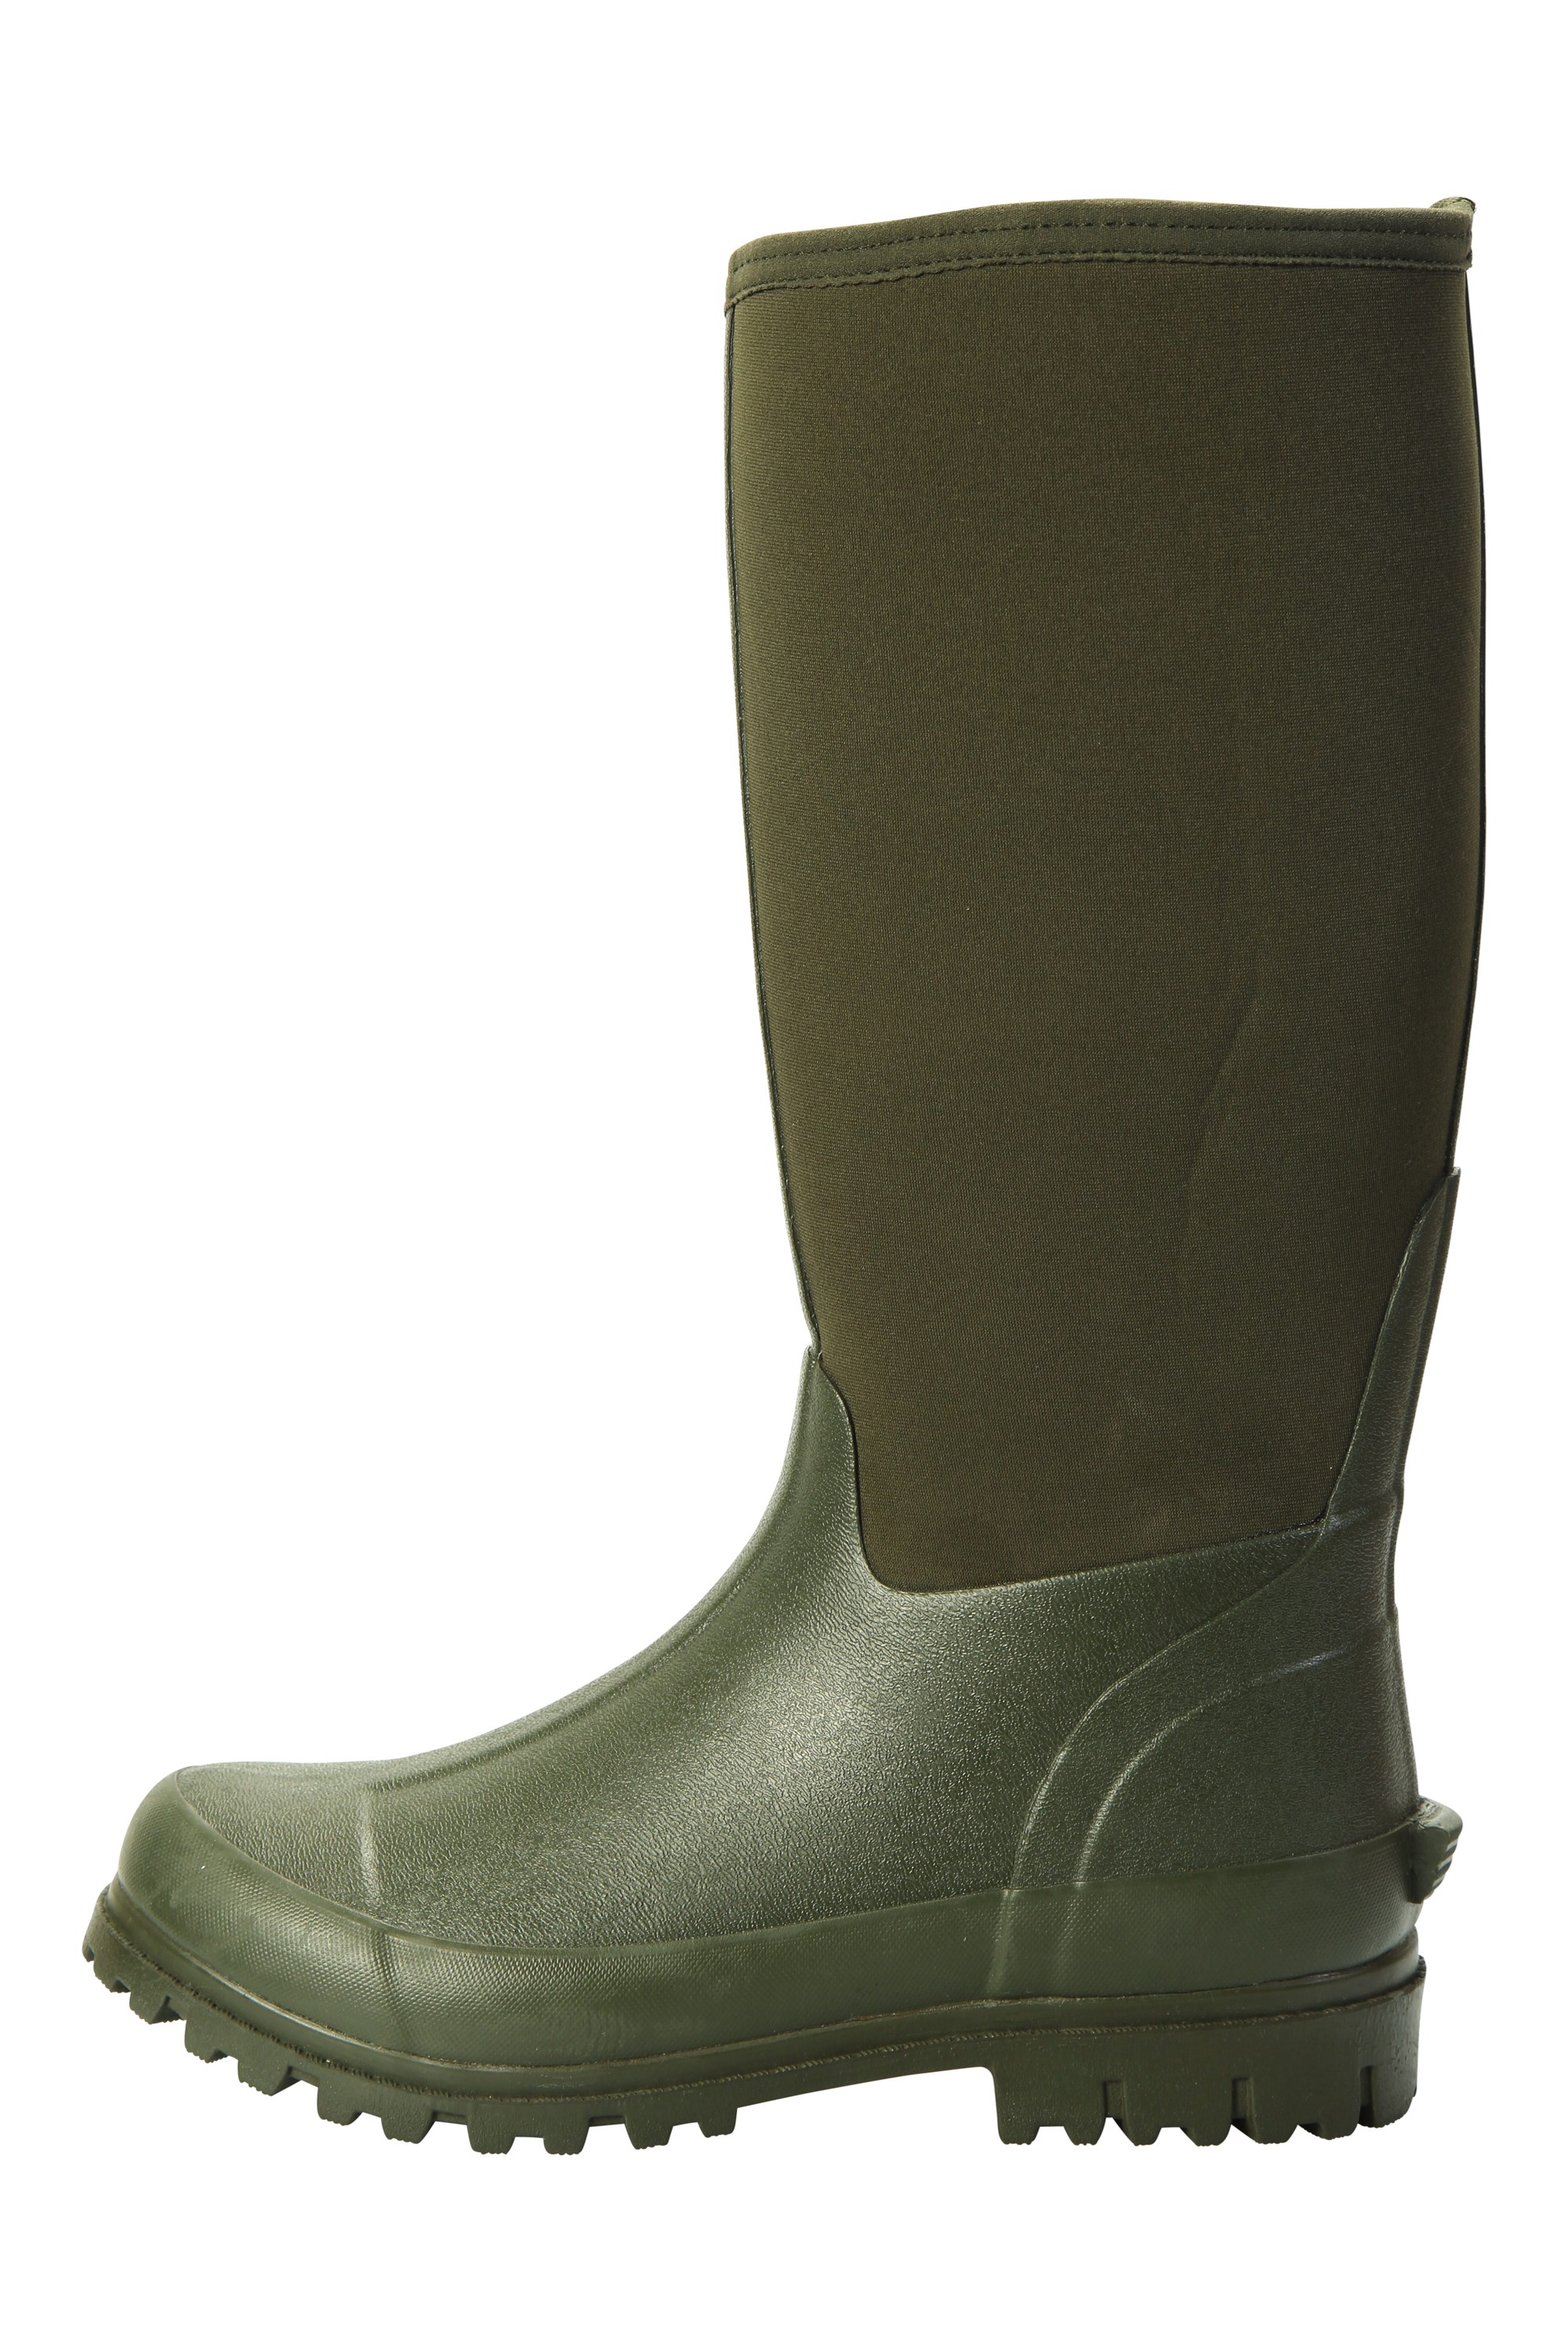 Mountain Warehouse Rubber 40cm in Khaki 01 for Men Green Mens Shoes Boots Wellington and rain boots 